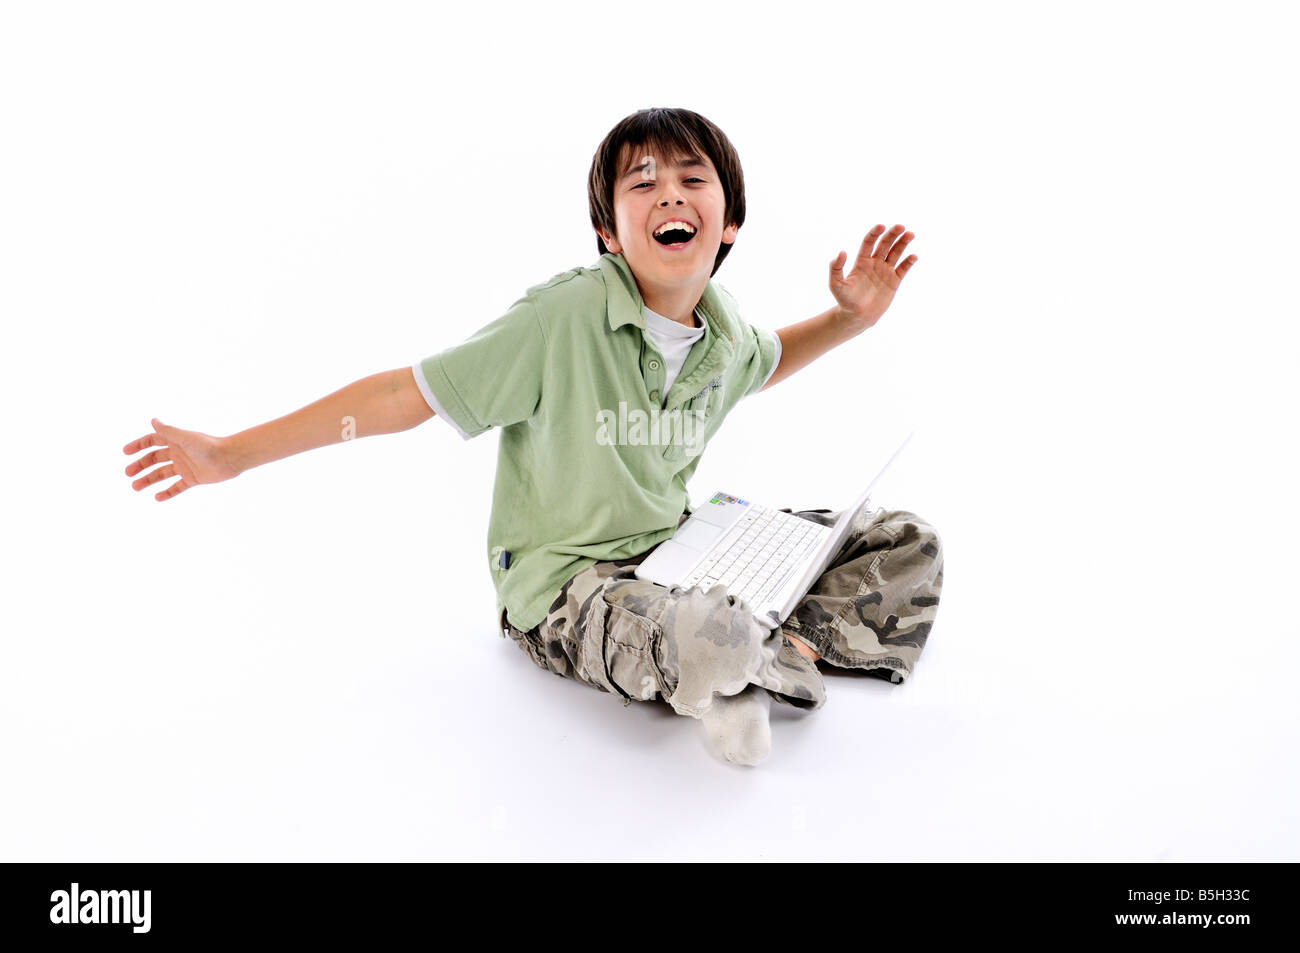 Young boy using an ASUS Eee PC laptop and laughing Stock Photo